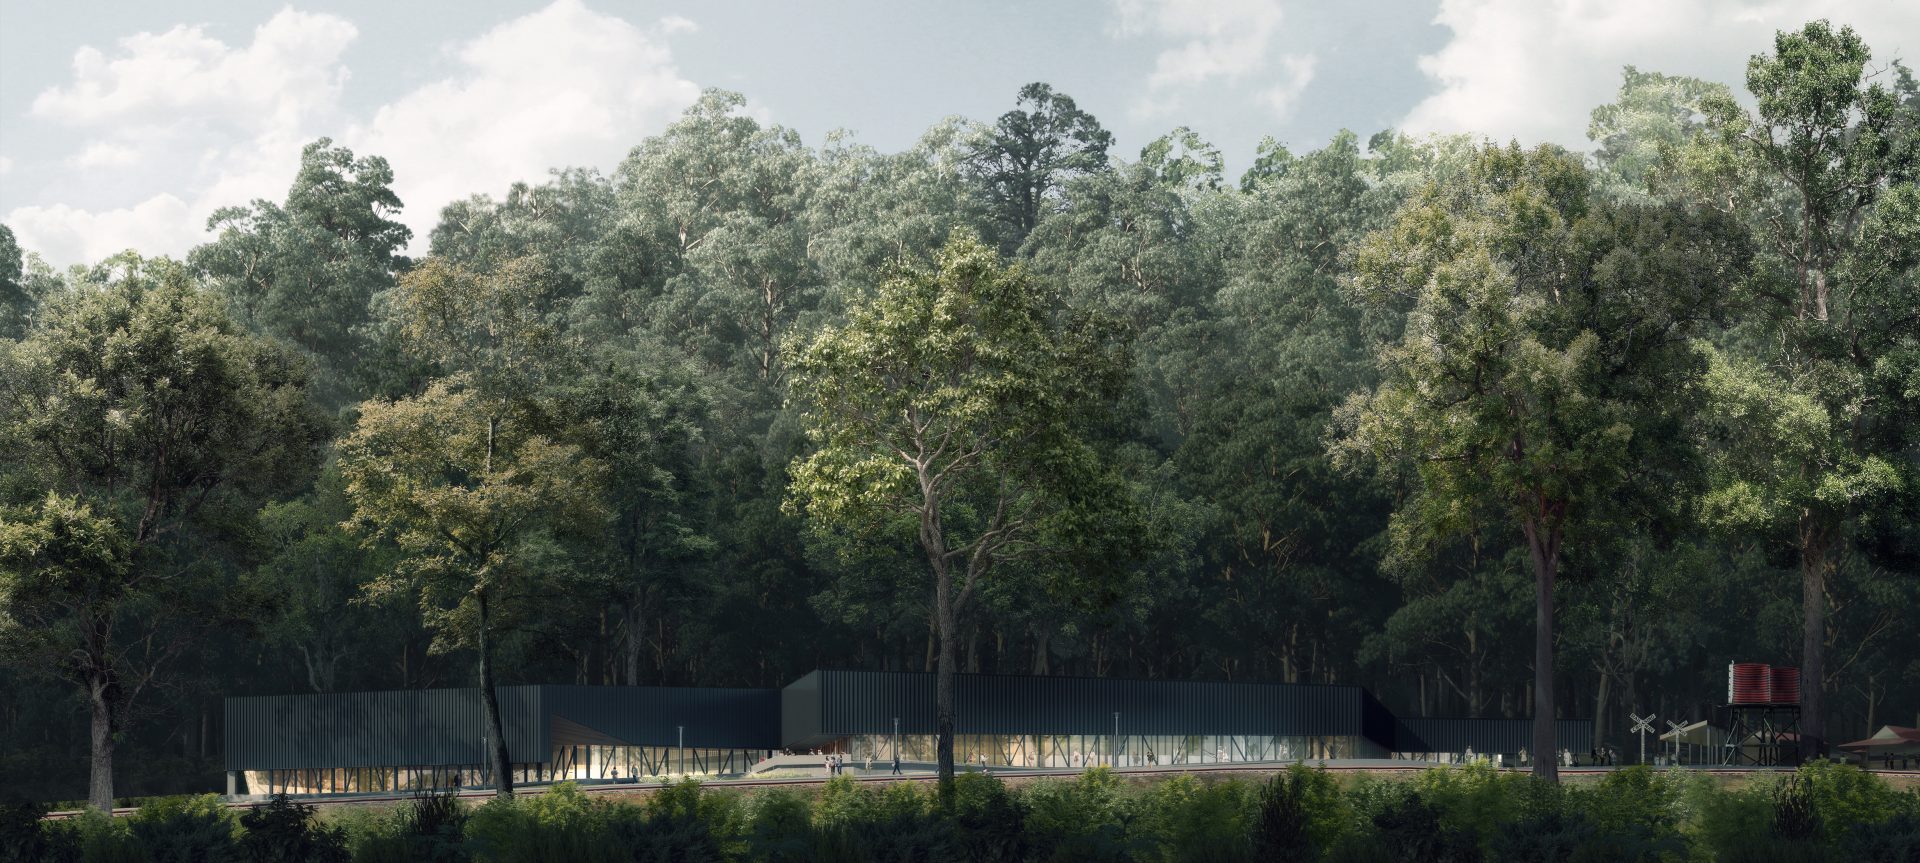 Render showing an external view of the Lakeside Visitor Centre